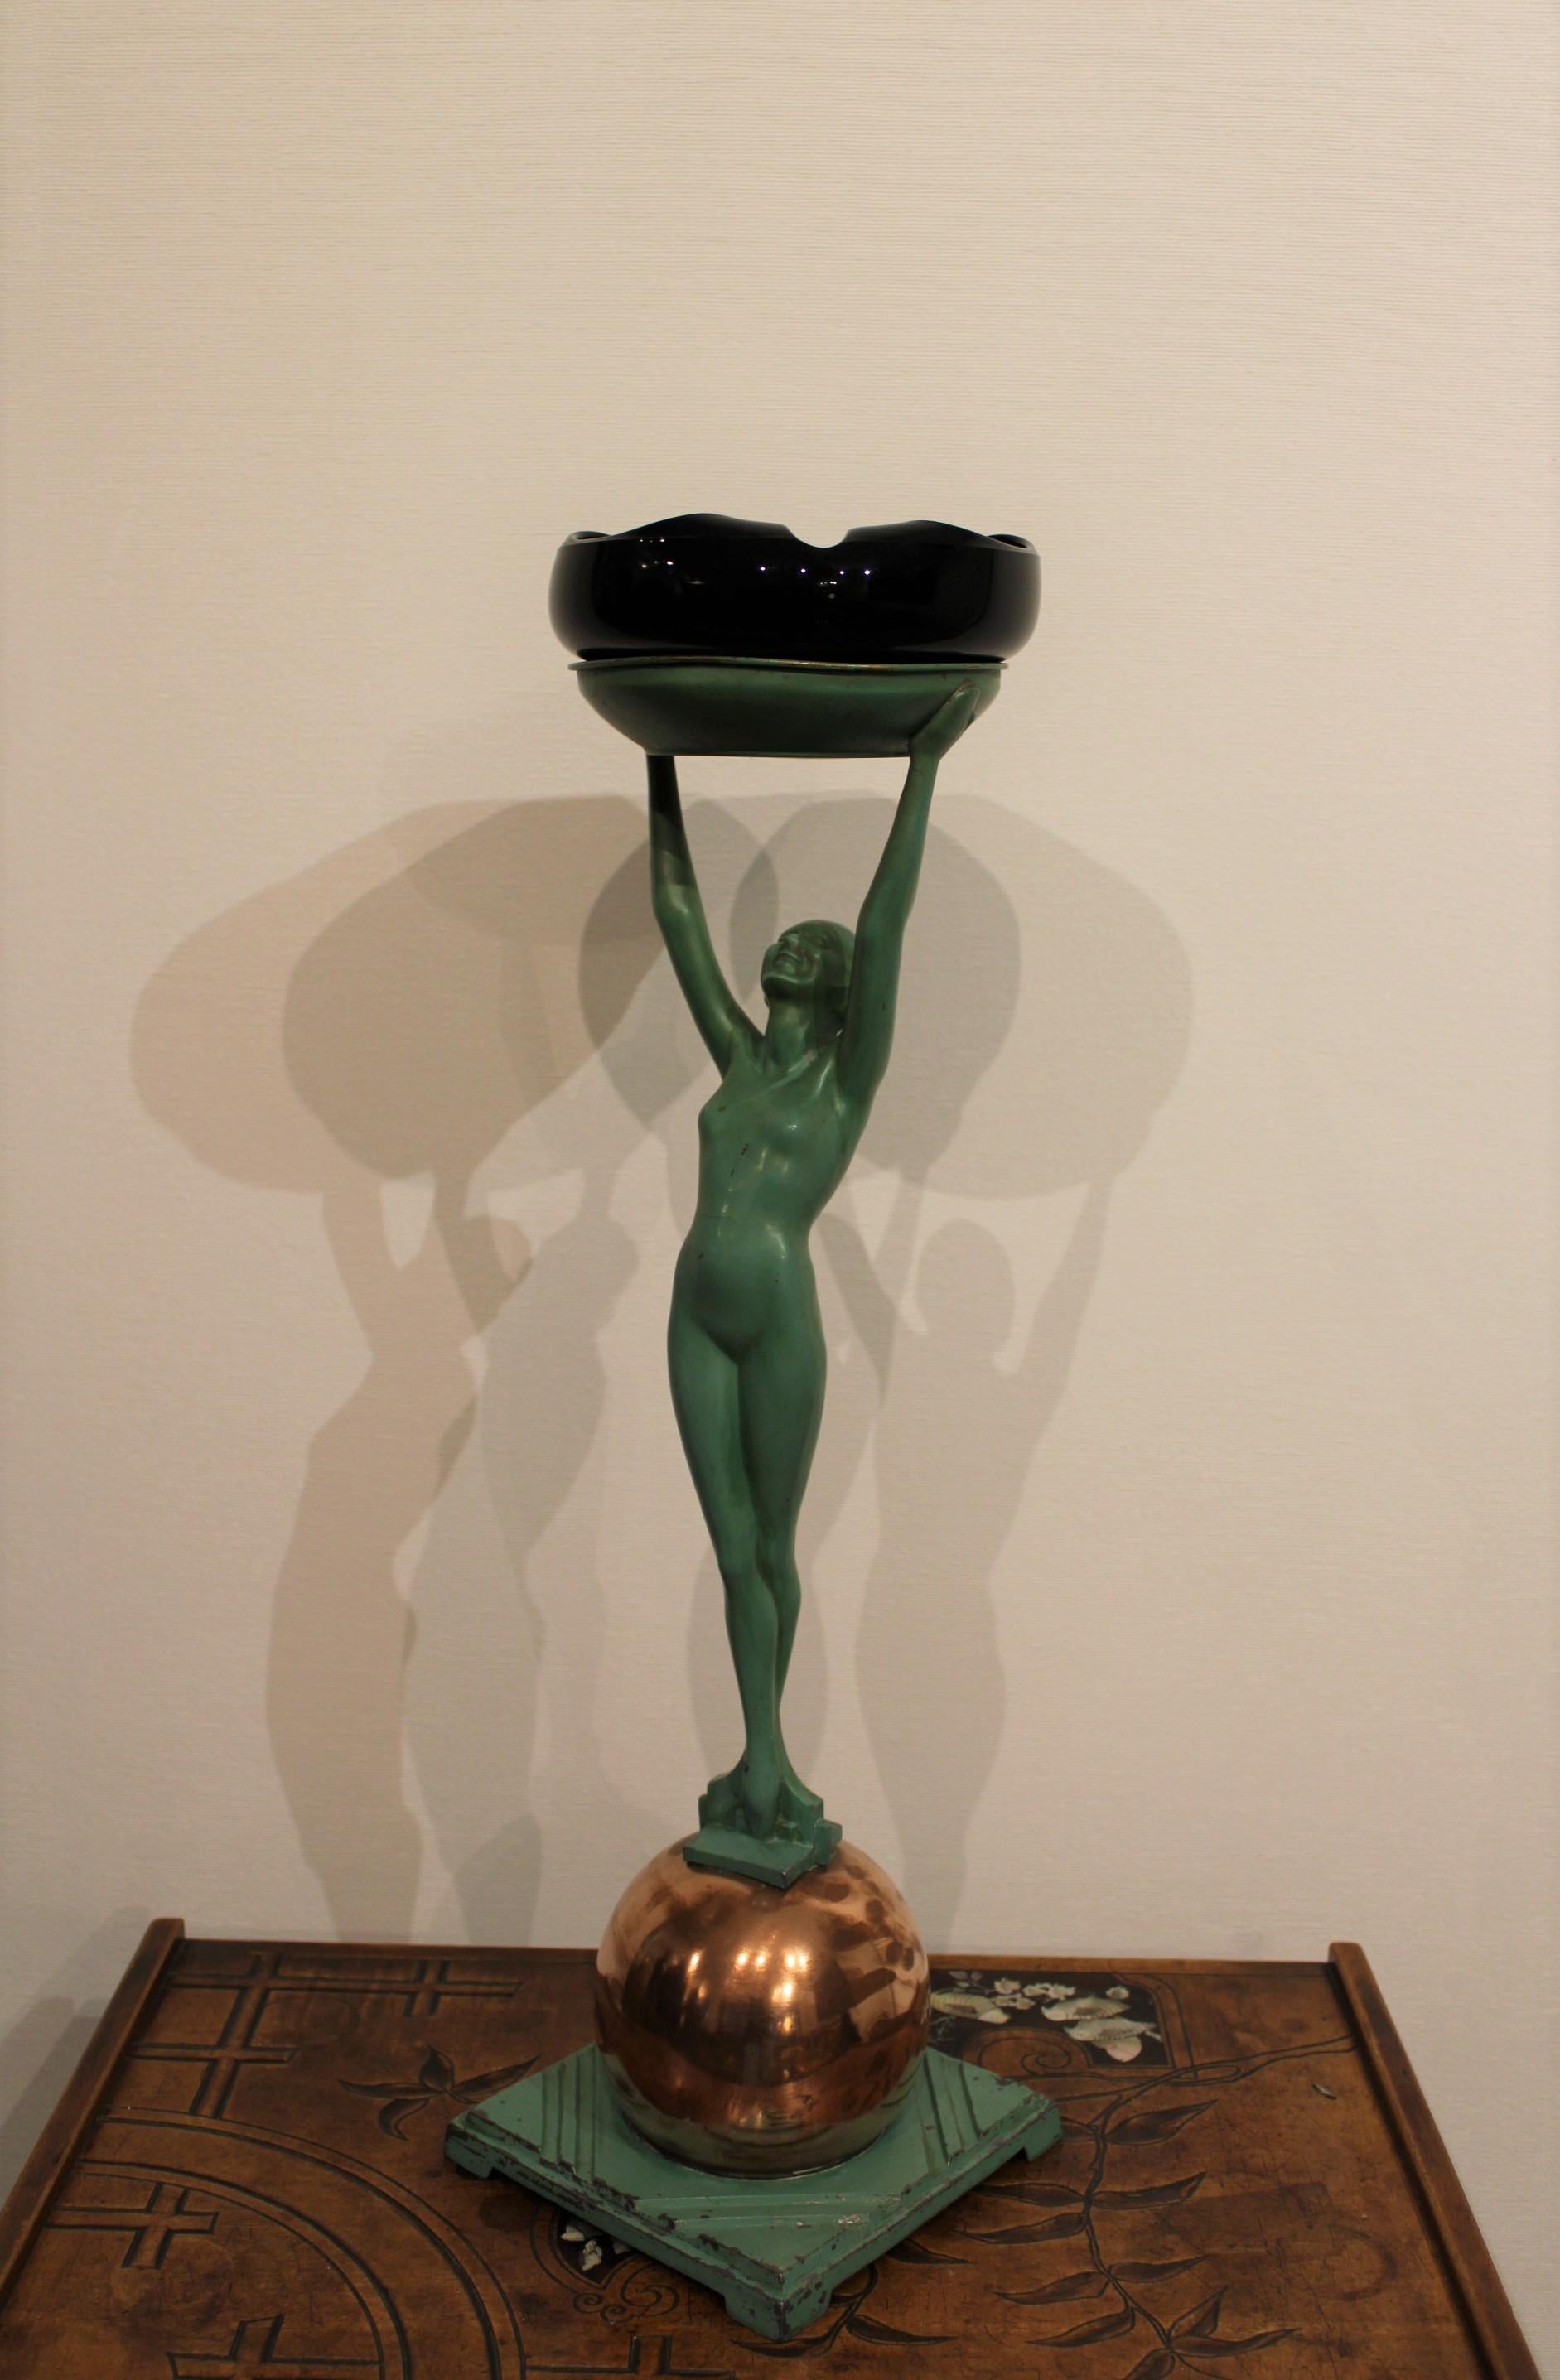 Art Deco sculpture in metal.
Black ashtray in glass, signed below.

Wears and crack on the belly of the character (see photos details).
 